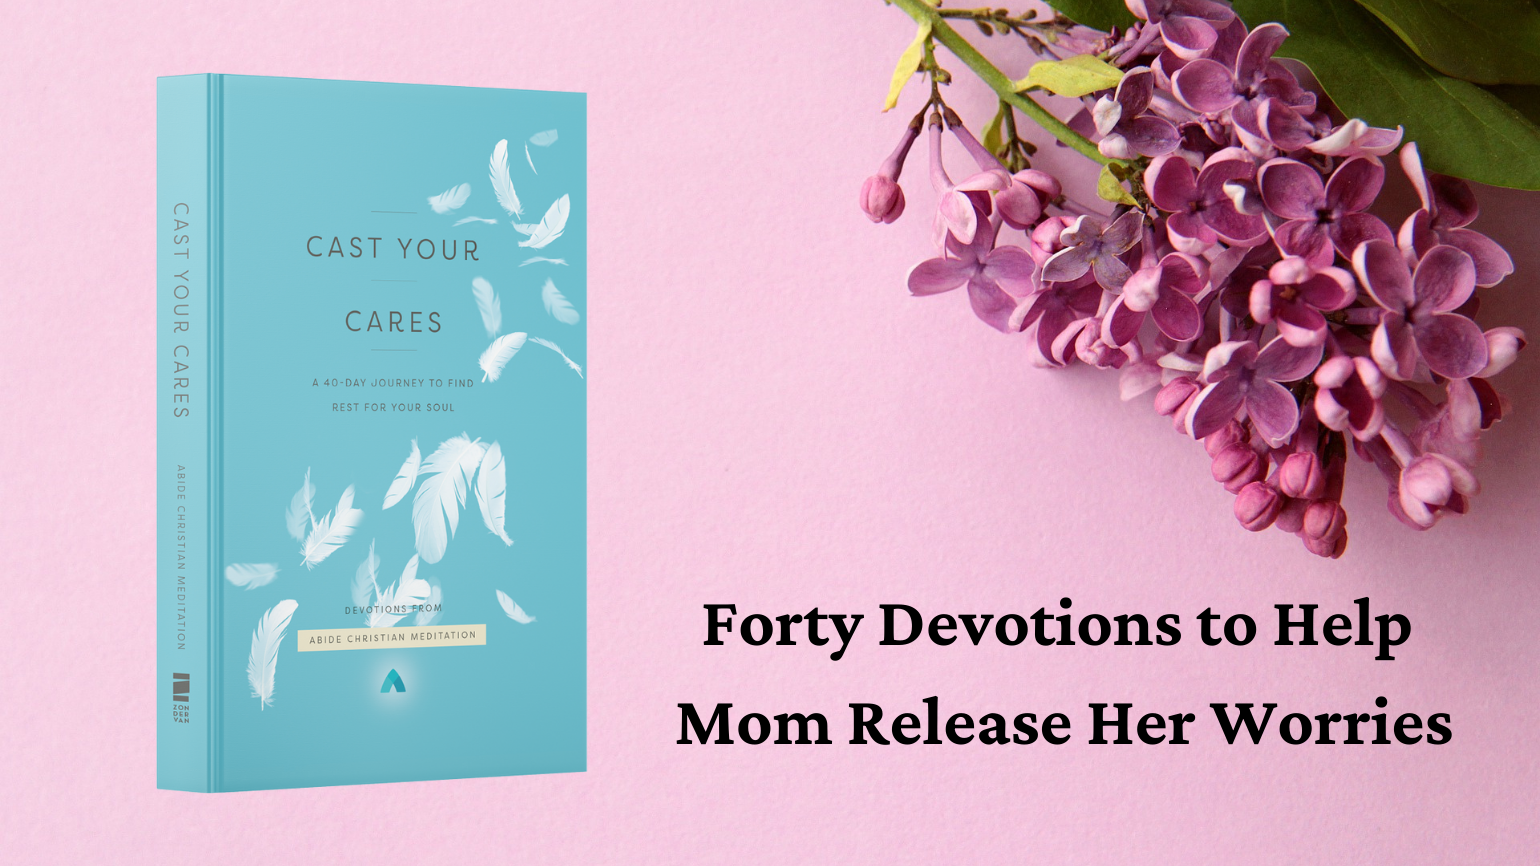 Cast Your Cares (Abide) spiritual faith based mothers day gifts